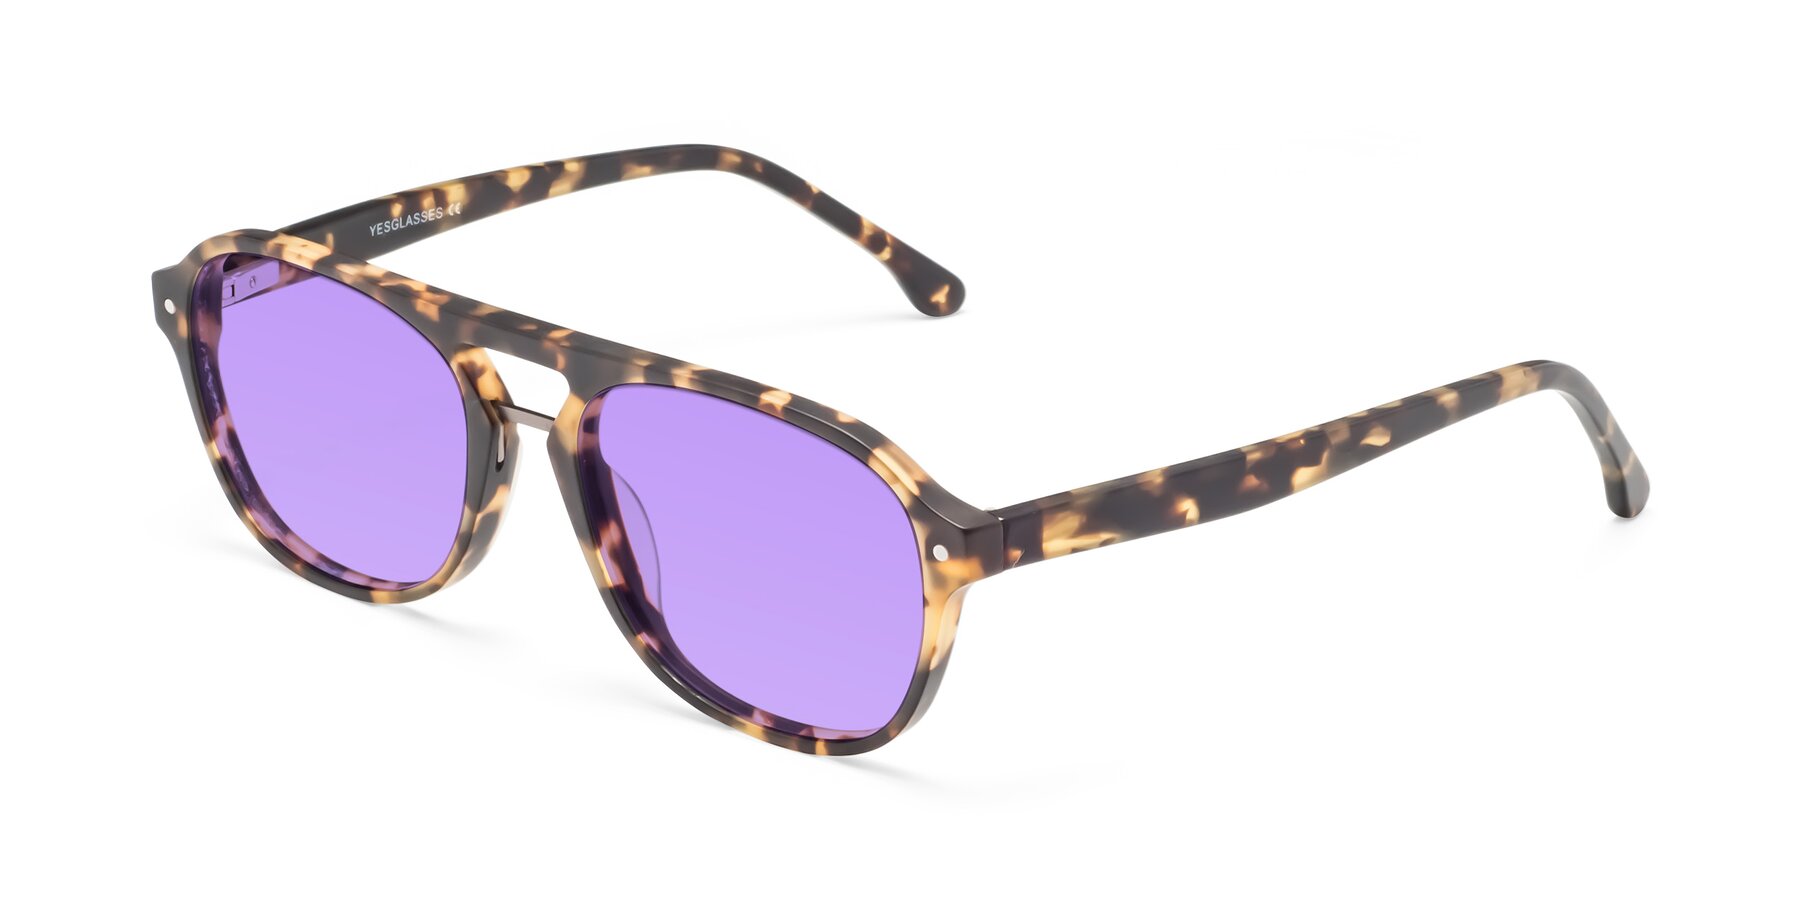 Angle of 17416 in Matte Tortoise with Medium Purple Tinted Lenses